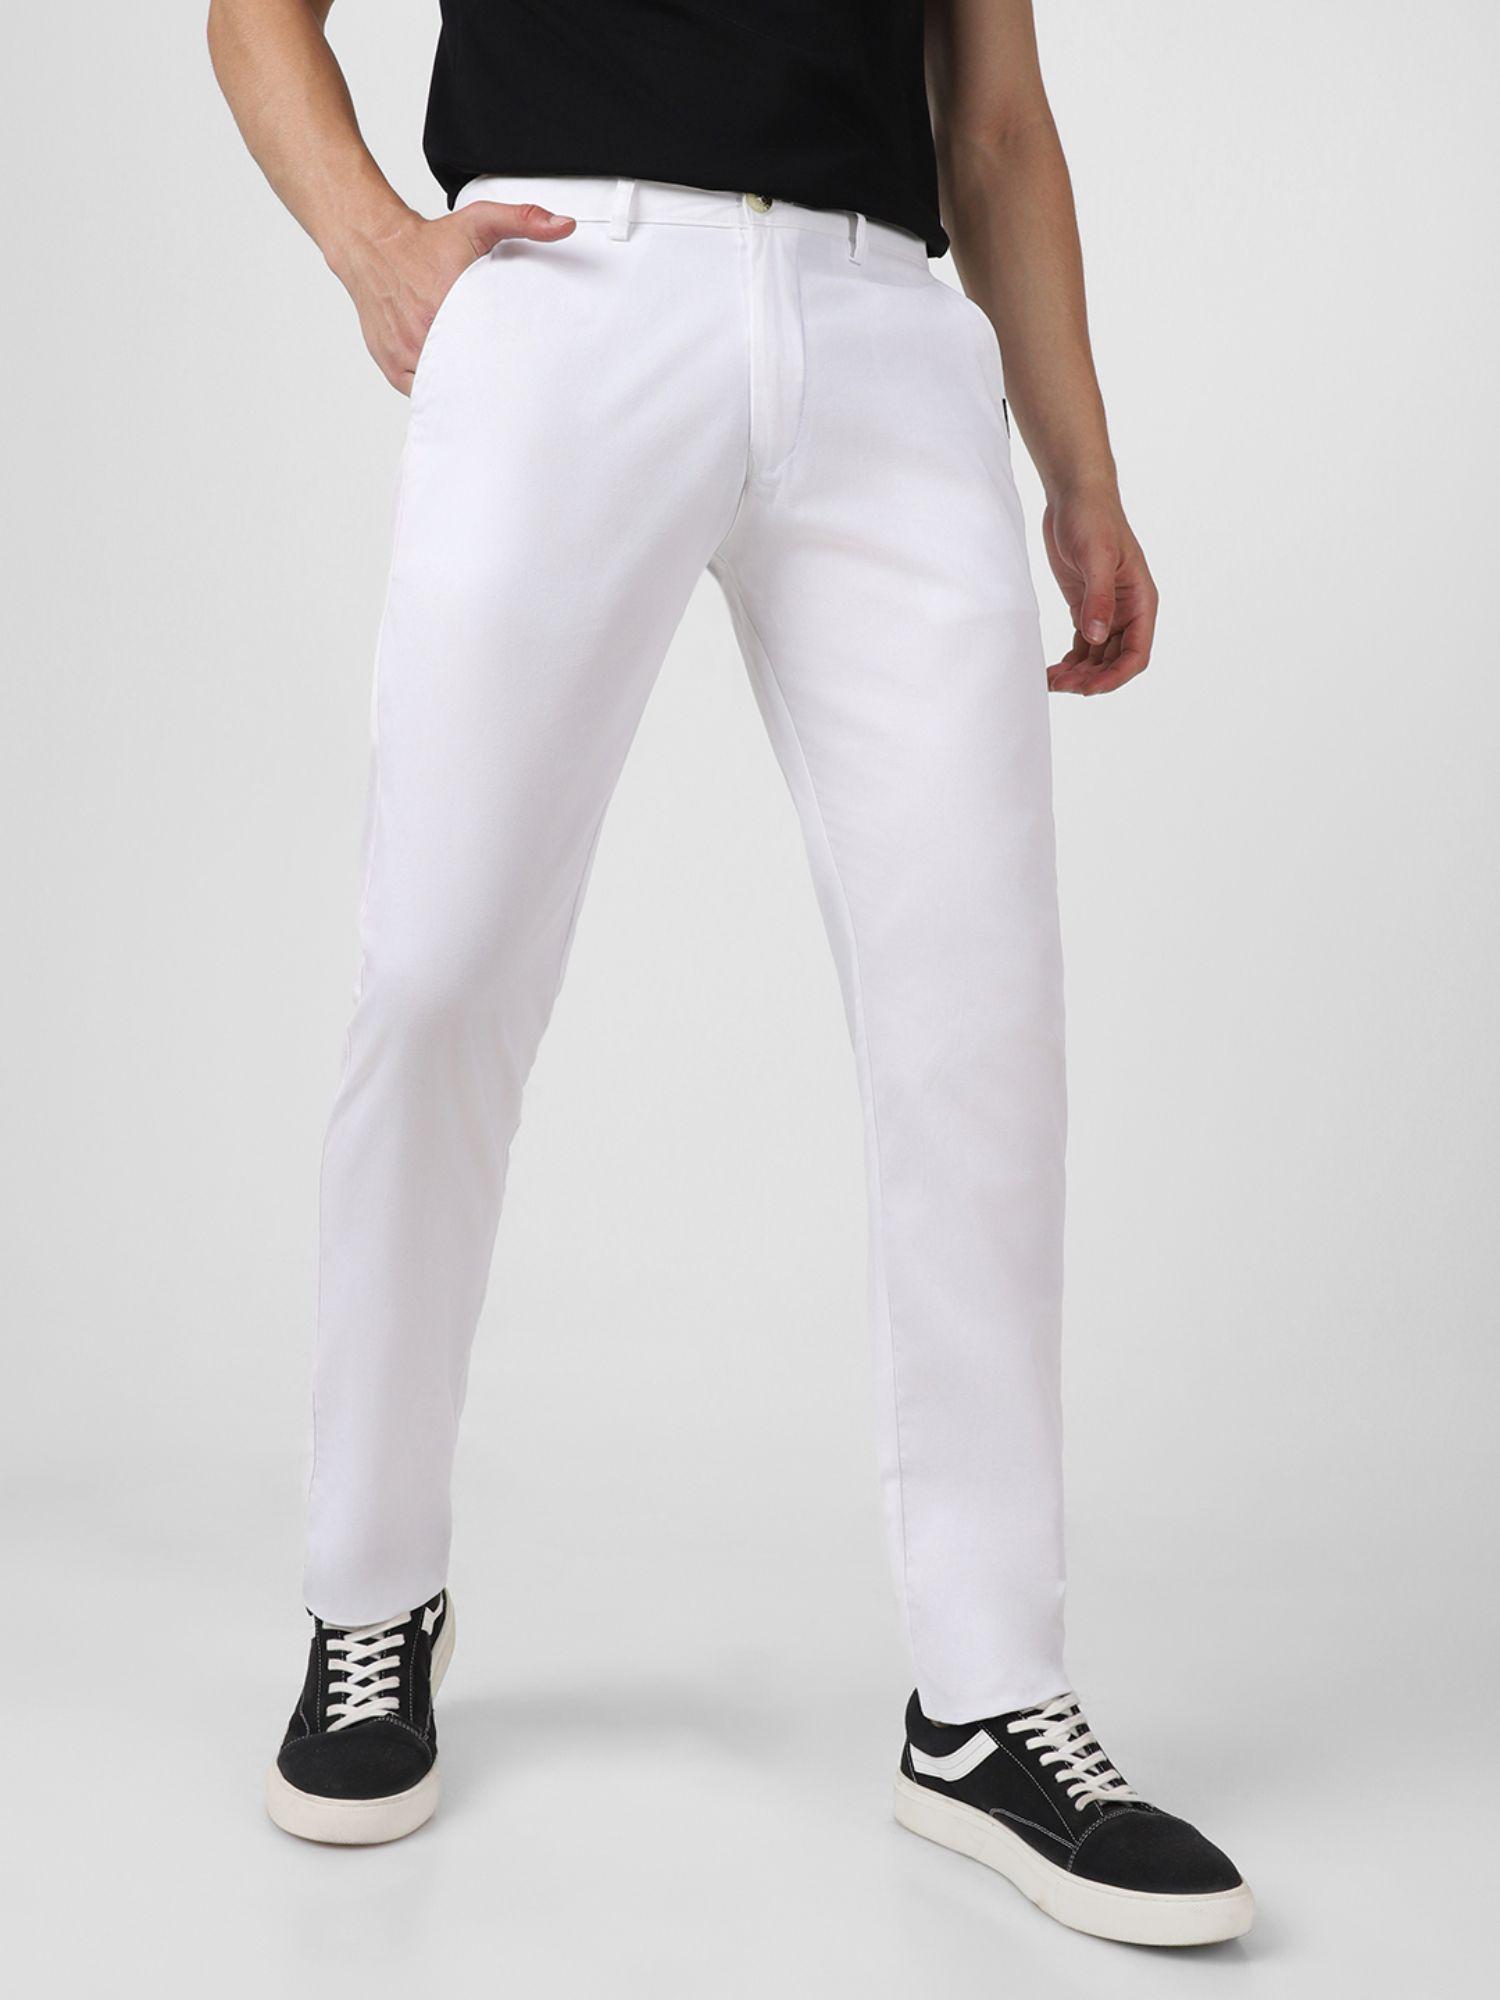 men white cotton slim fit casual chinos trousers